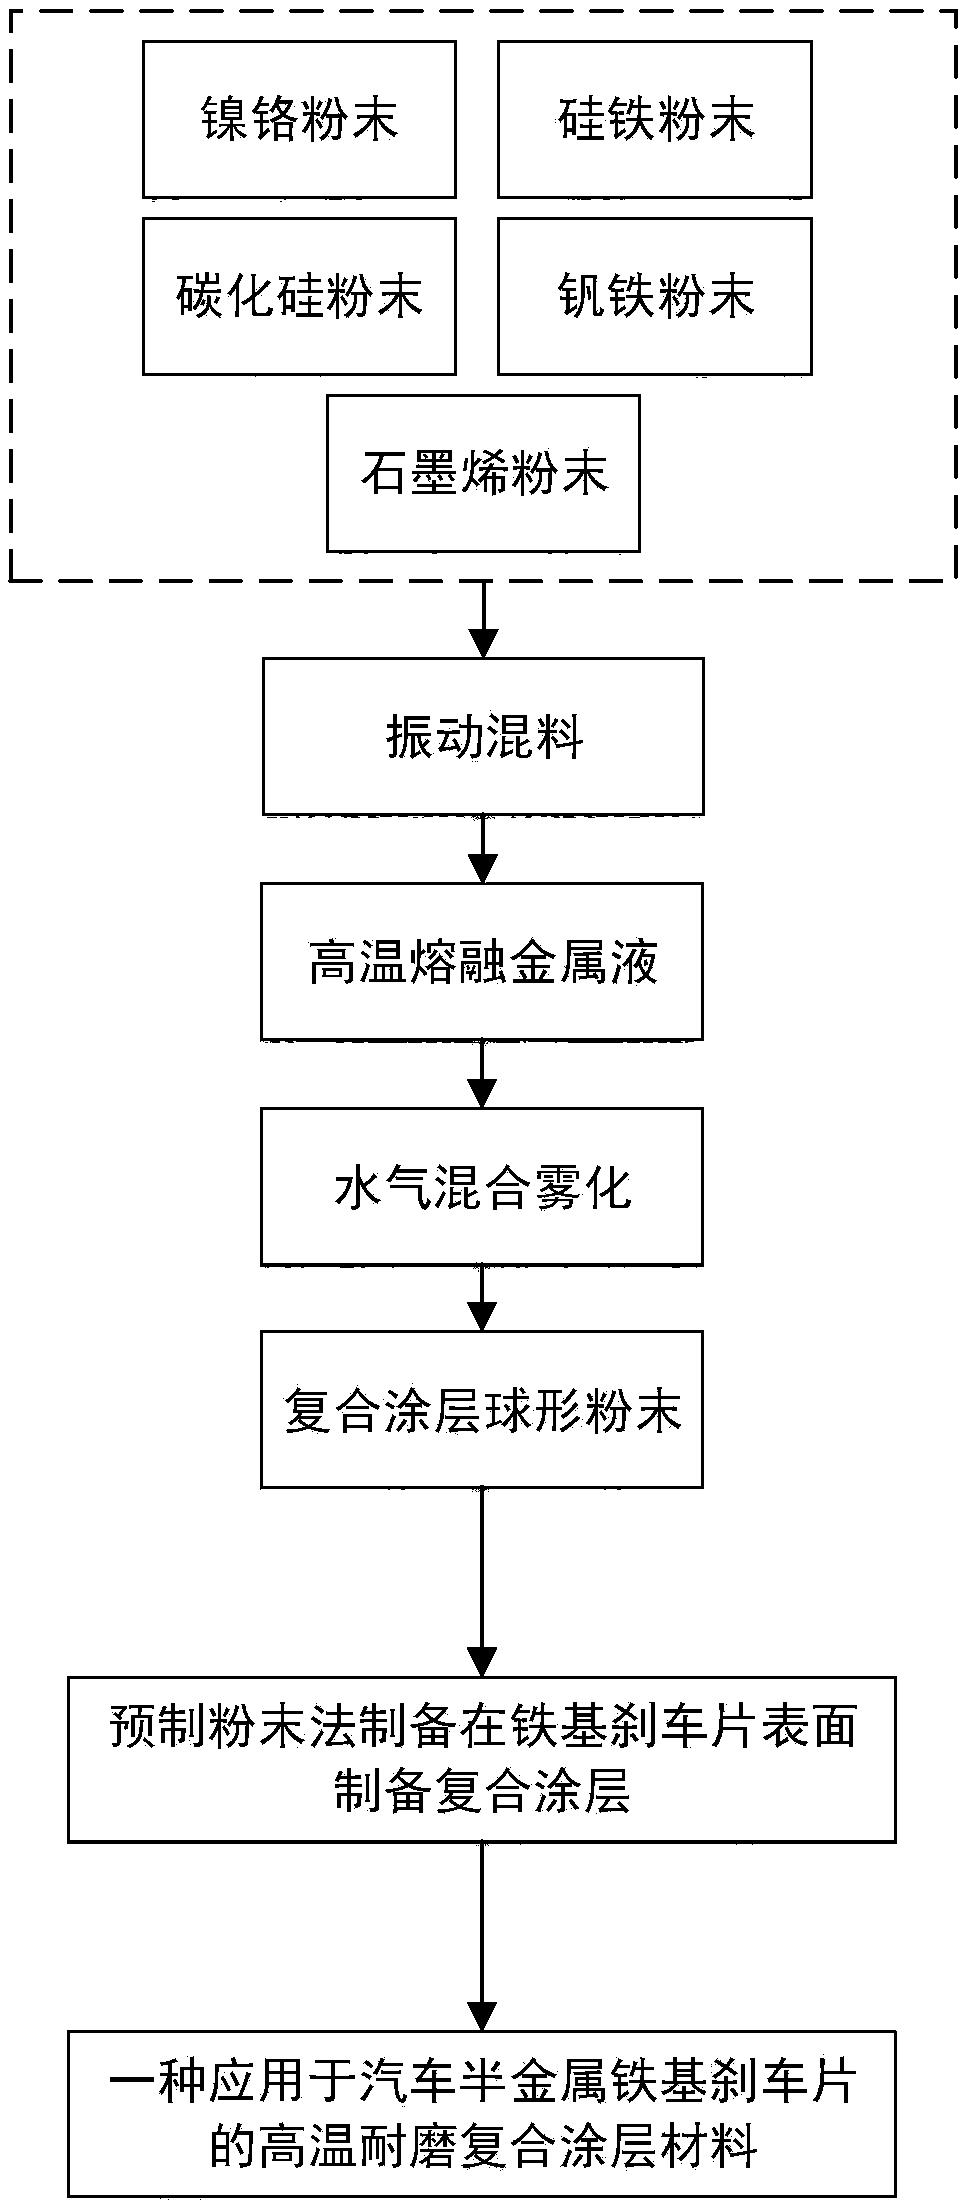 Composite coating material applied to semi-metal iron-based brake pads and preparation method for composite coating material